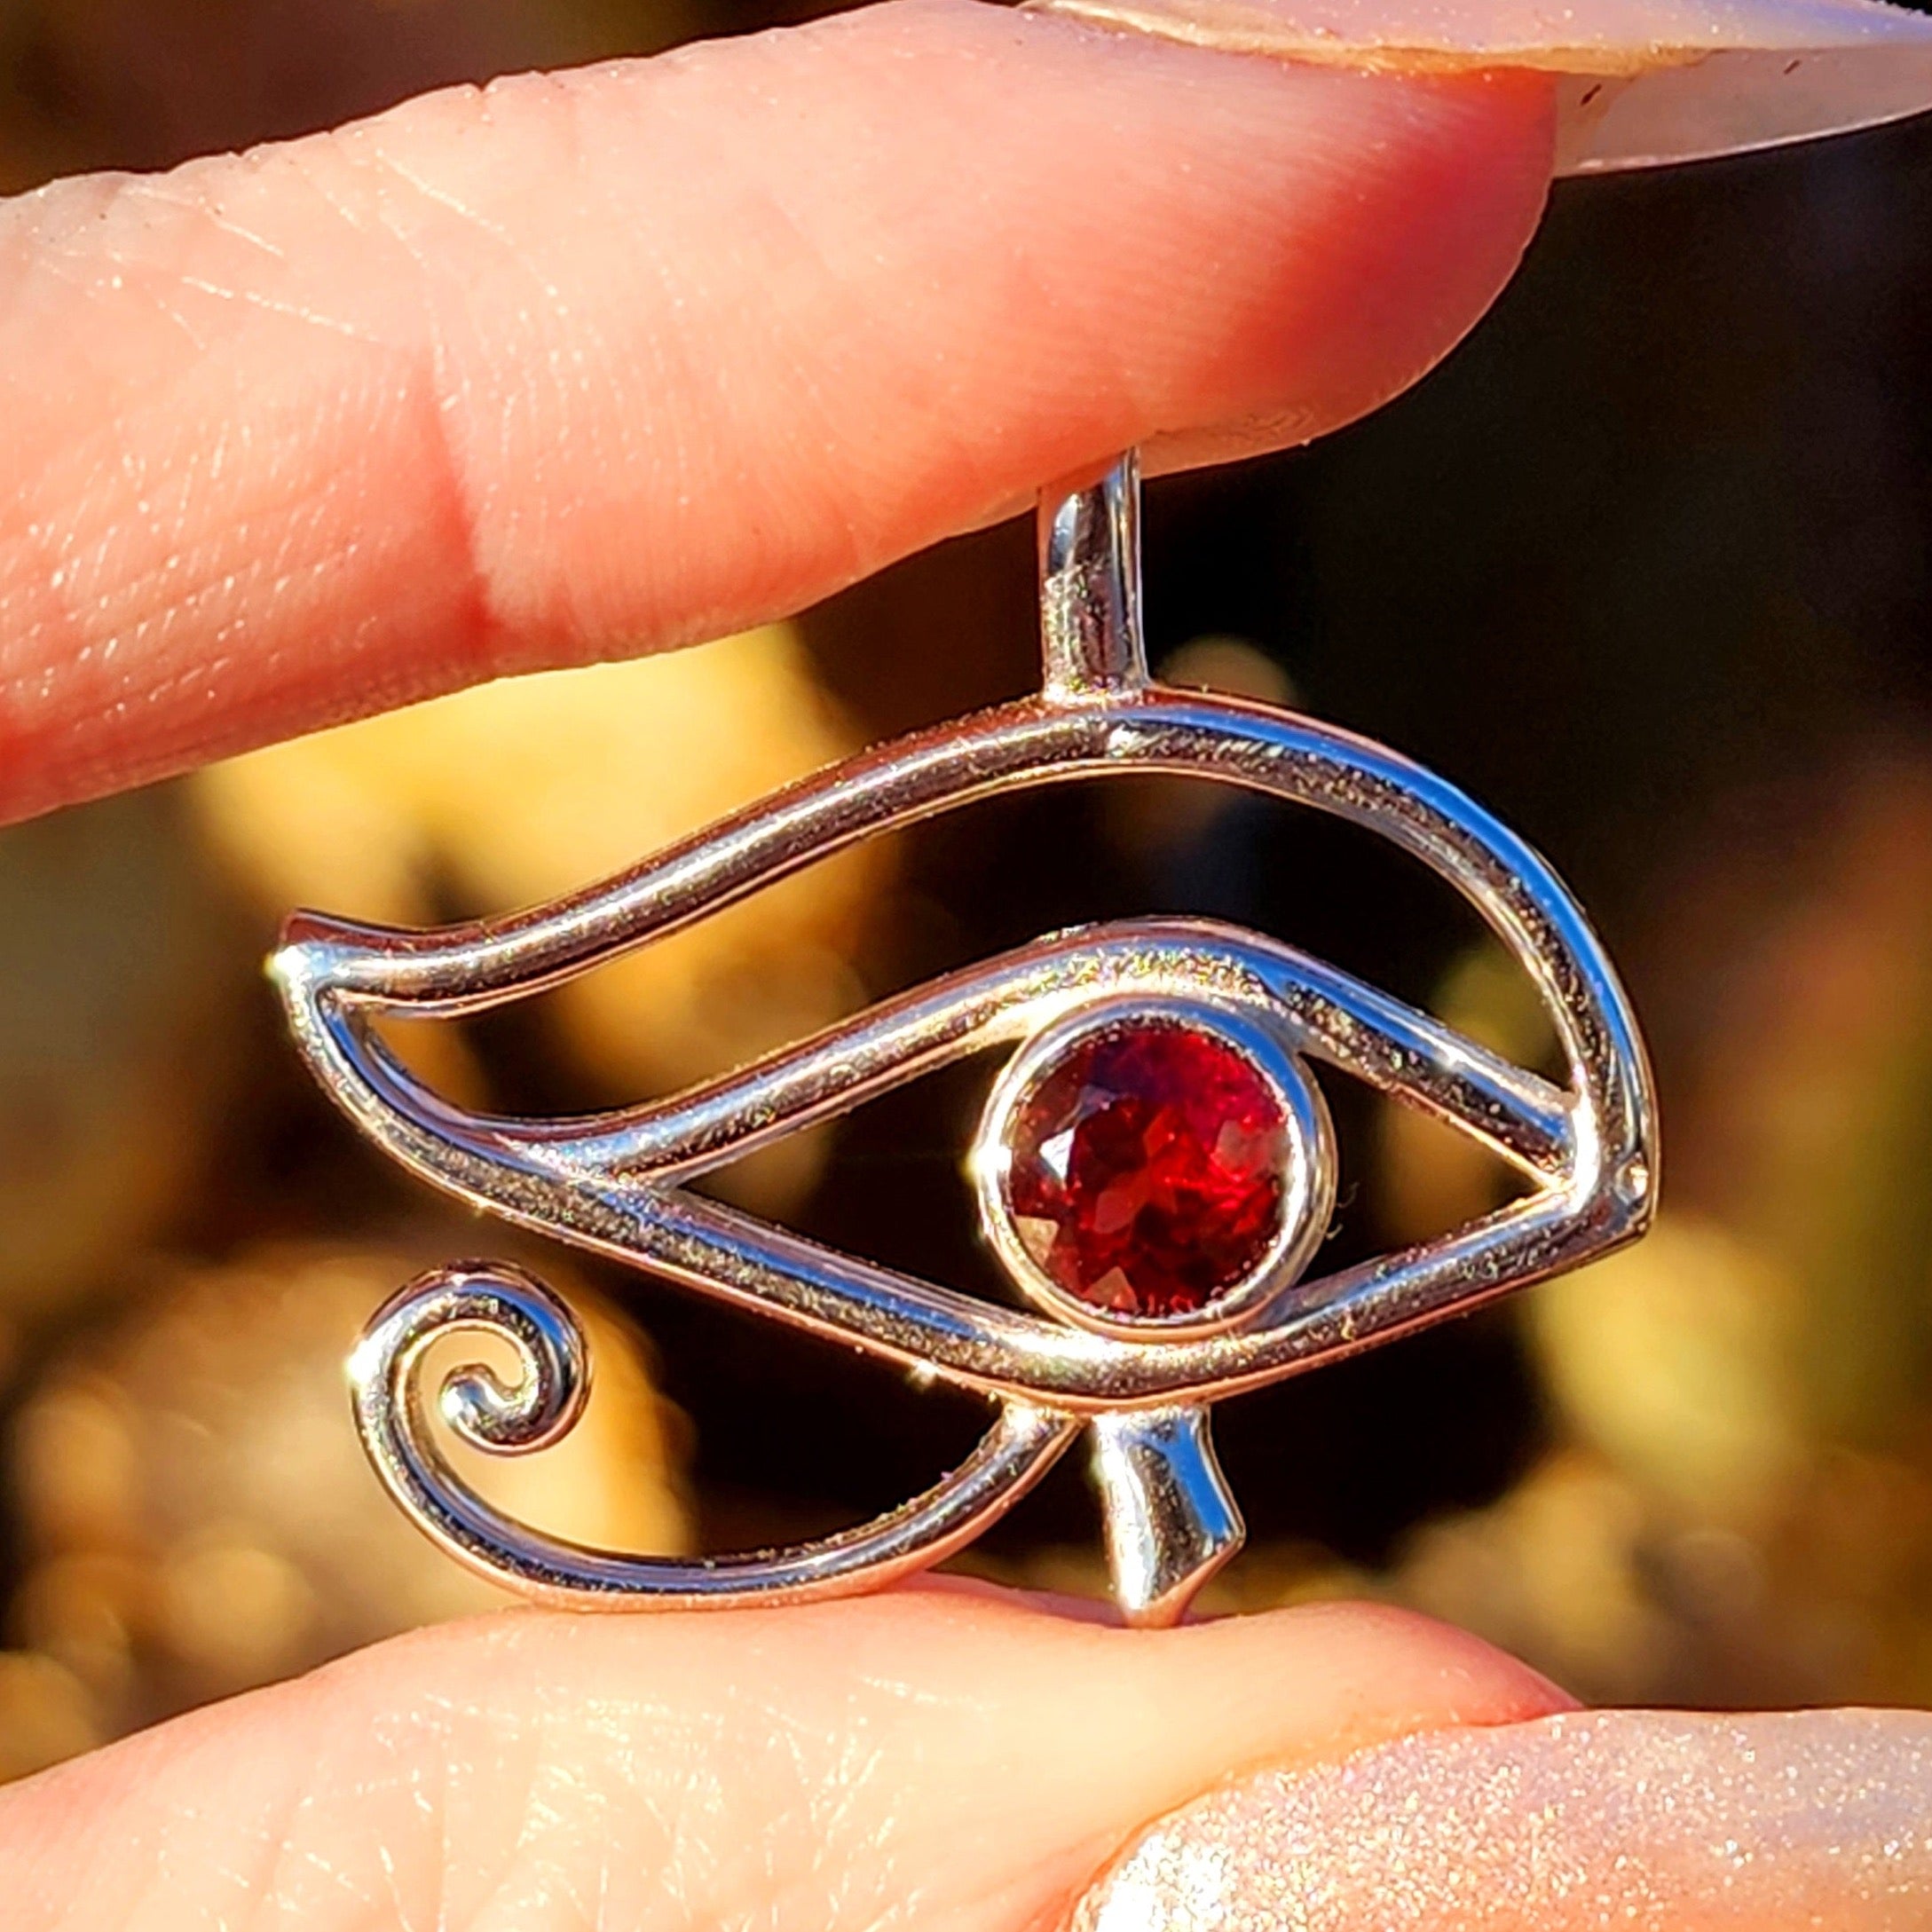 Garnet Eye of Ra Amulet Pendant .925 Silver for Health, Protection and Power